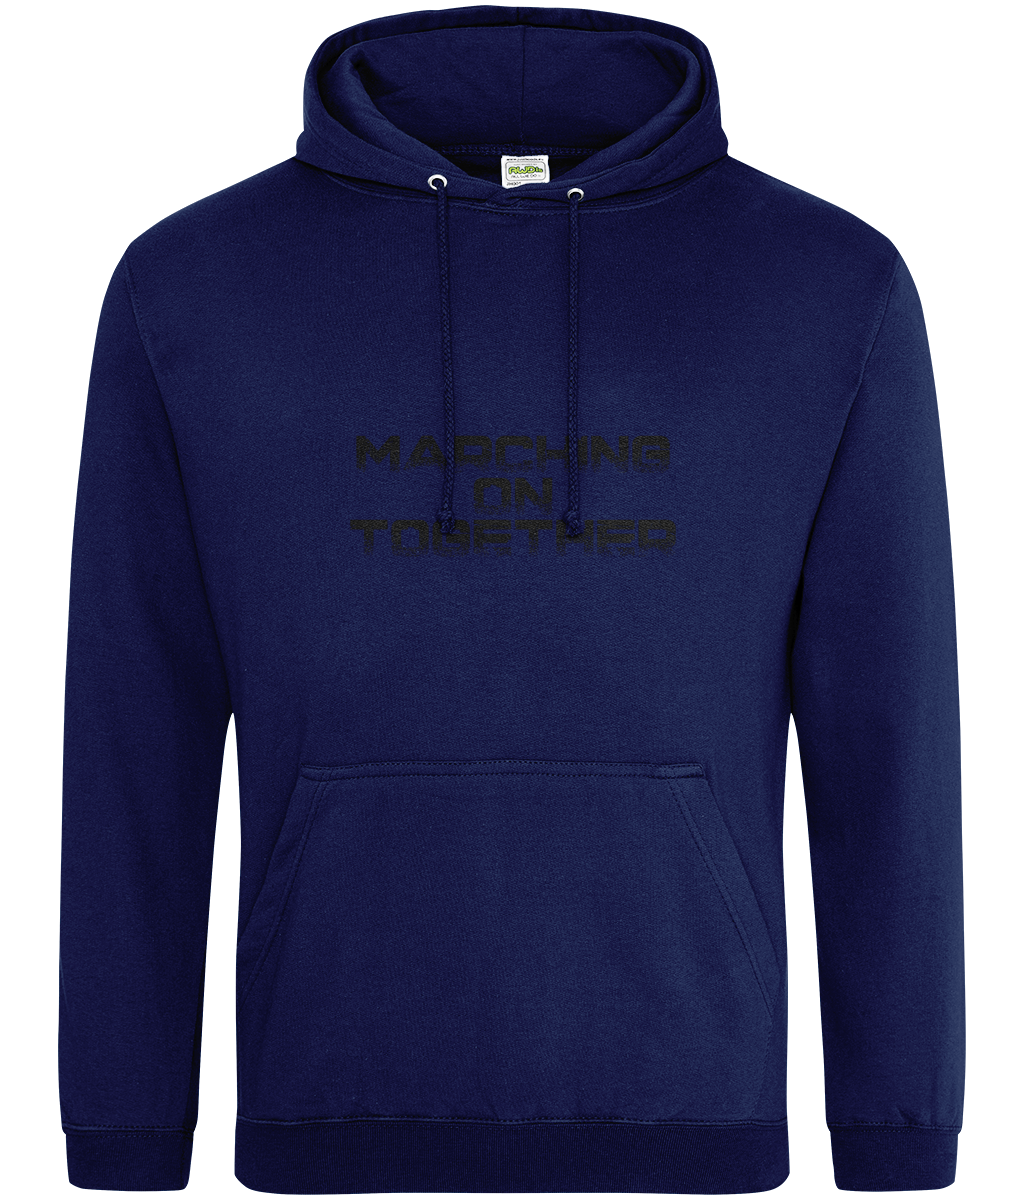 Marching on Together Hoodie Women